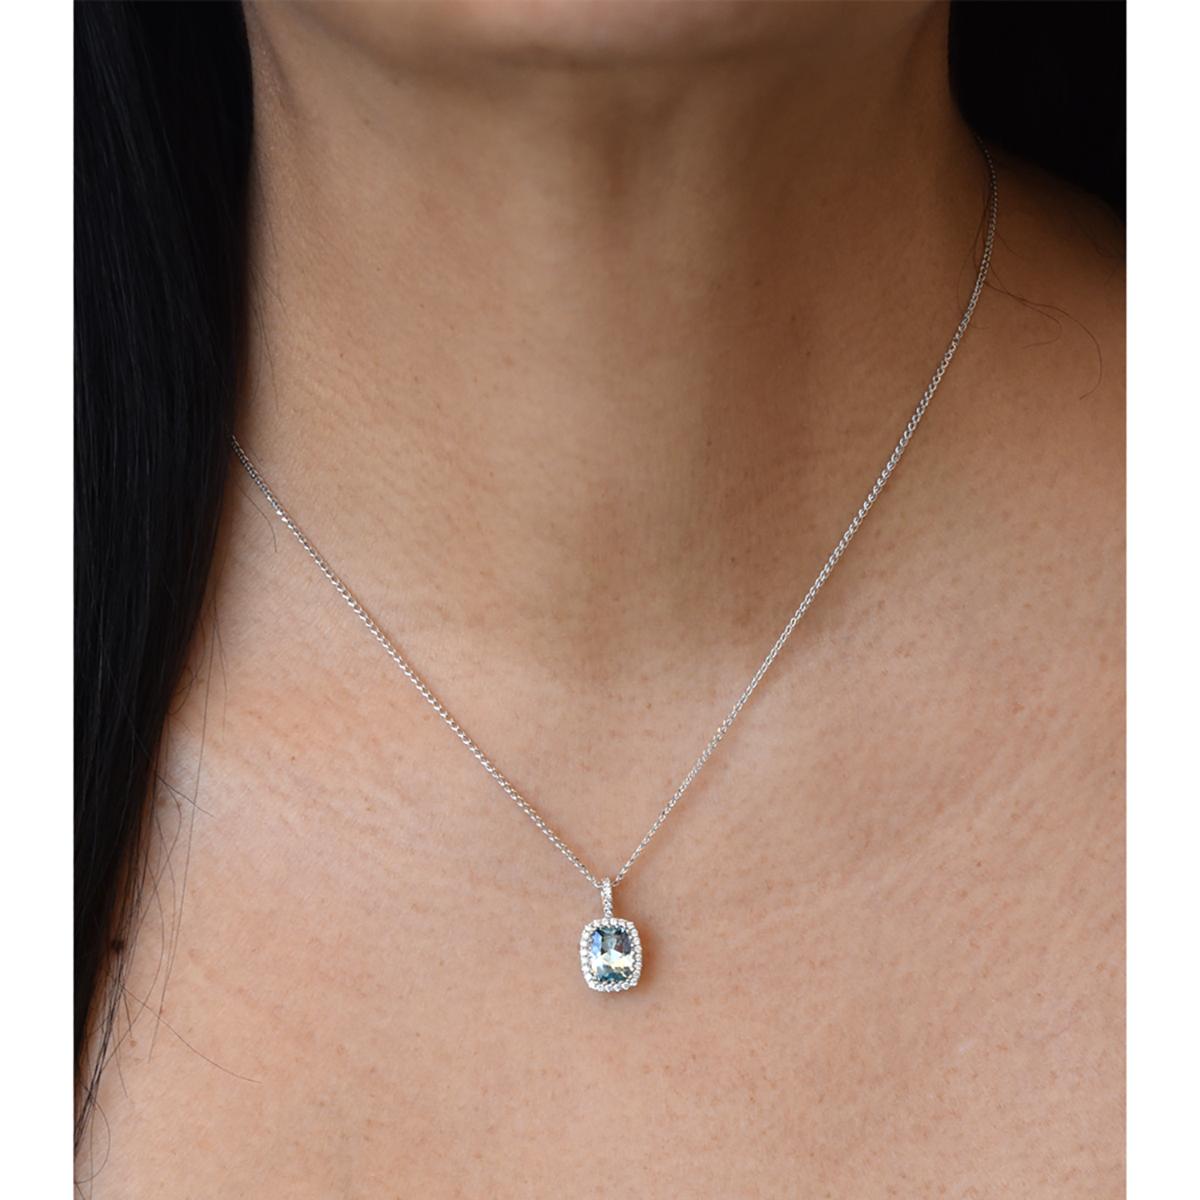 1.64 Carats Cushion Cut Aquamarine Necklace with Genuine Diamonds in White Gold For Sale 1